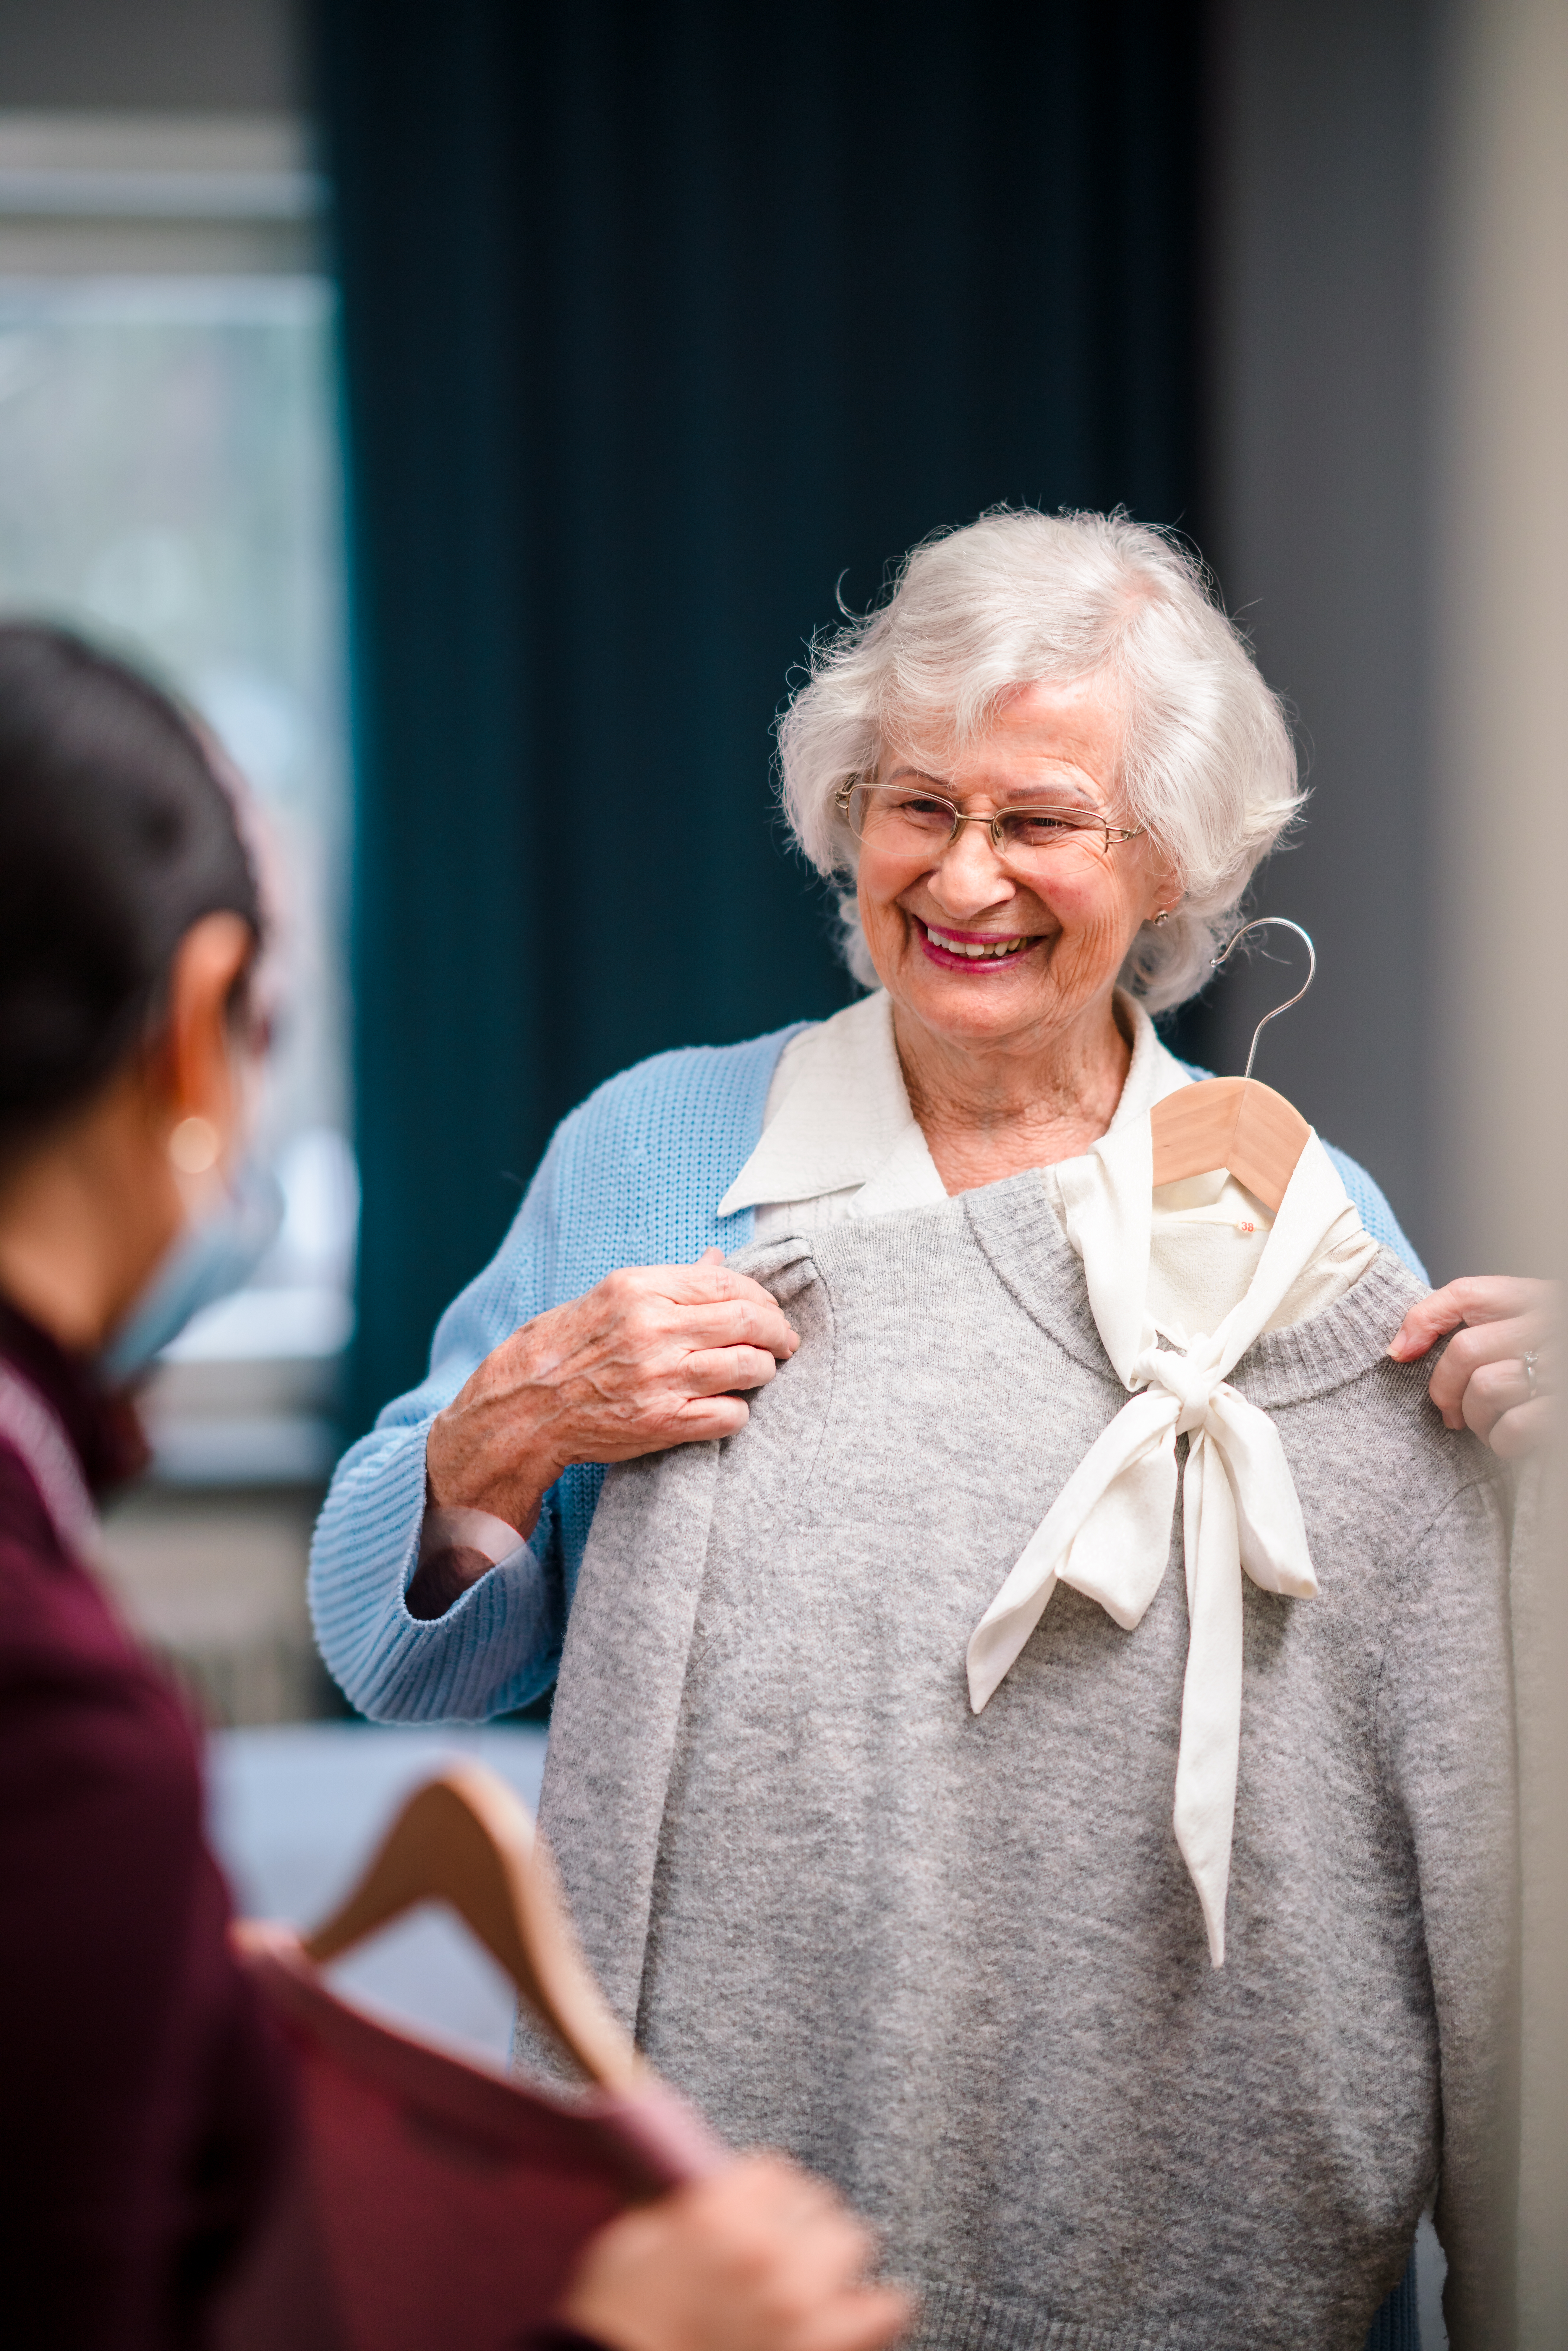 Assisted Living, Or Live-In Care